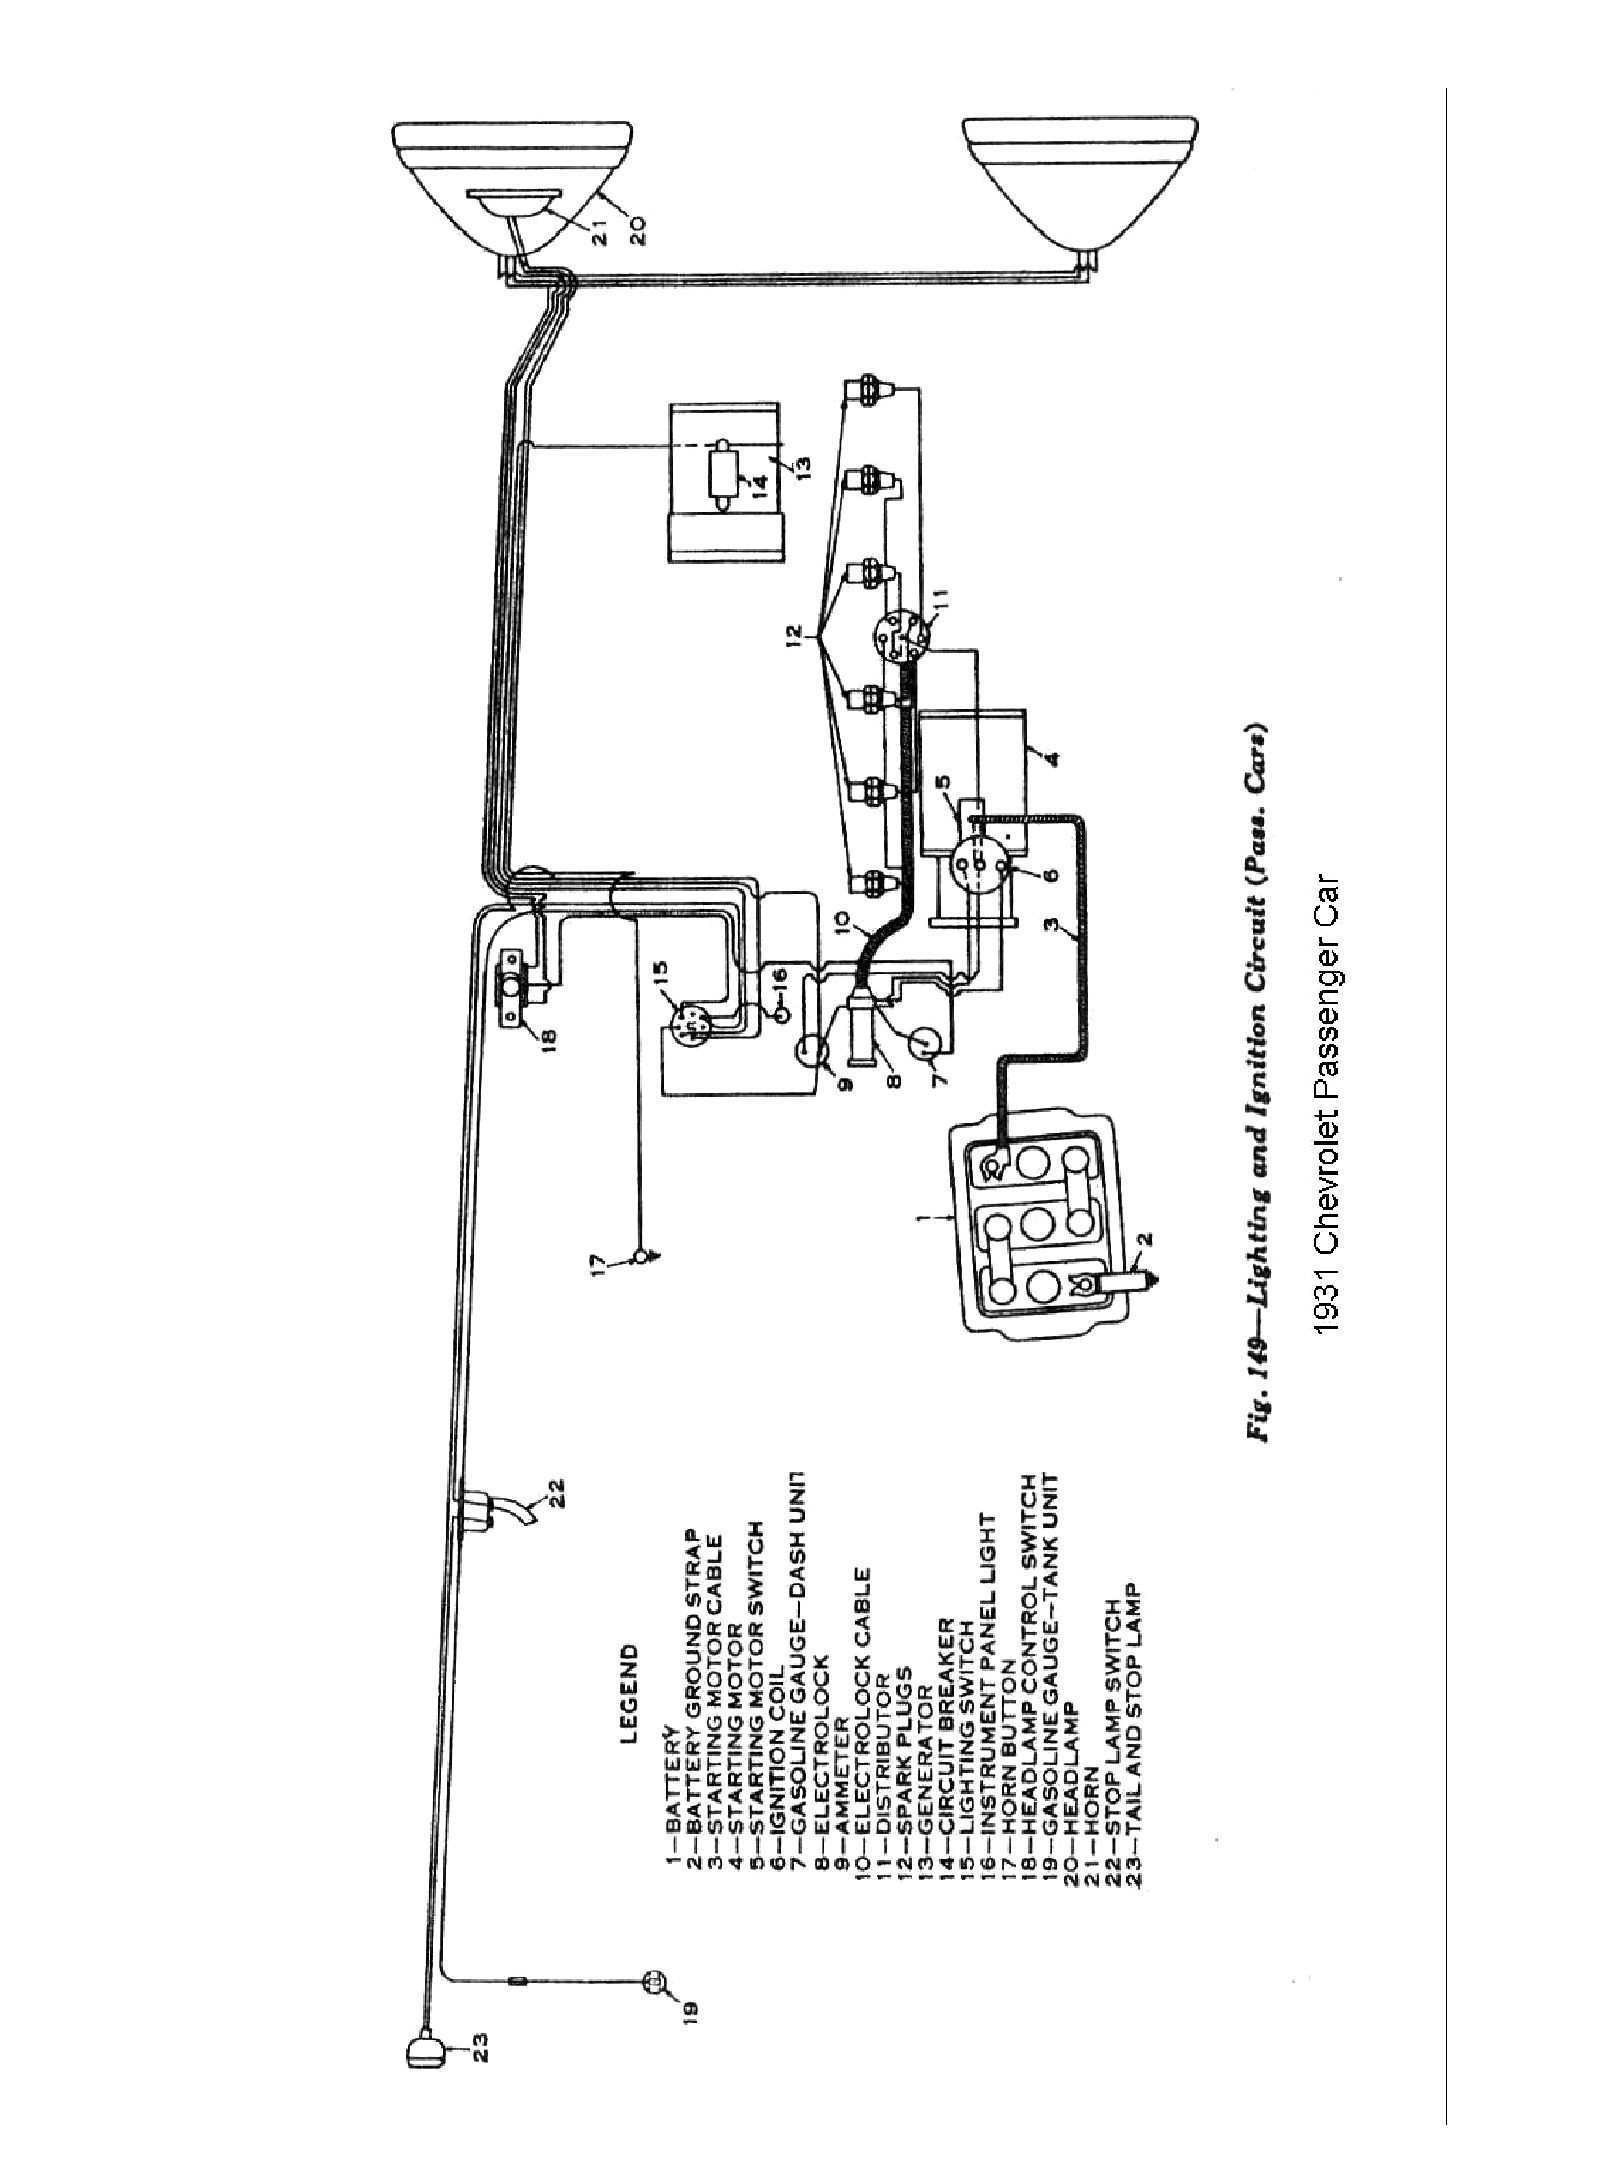 Jeep Liberty Engine Diagram E Light Two Switches Wiring Diagrams Reference Peerless Light Of Jeep Liberty Engine Diagram